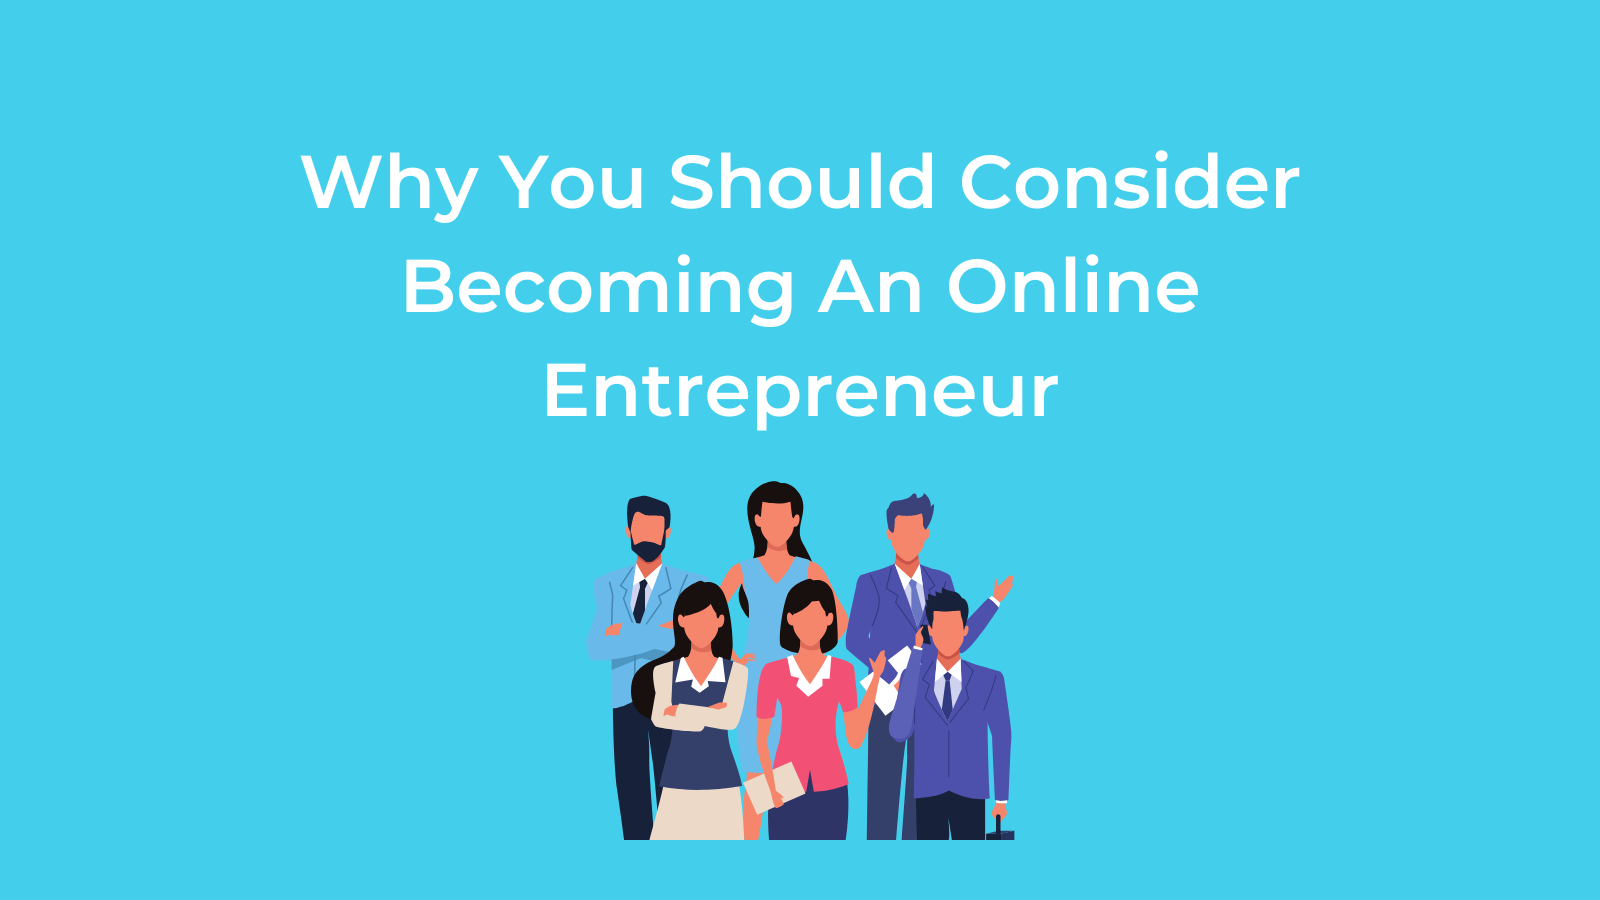 Why You Should Consider Becoming An Online Entrepreneur